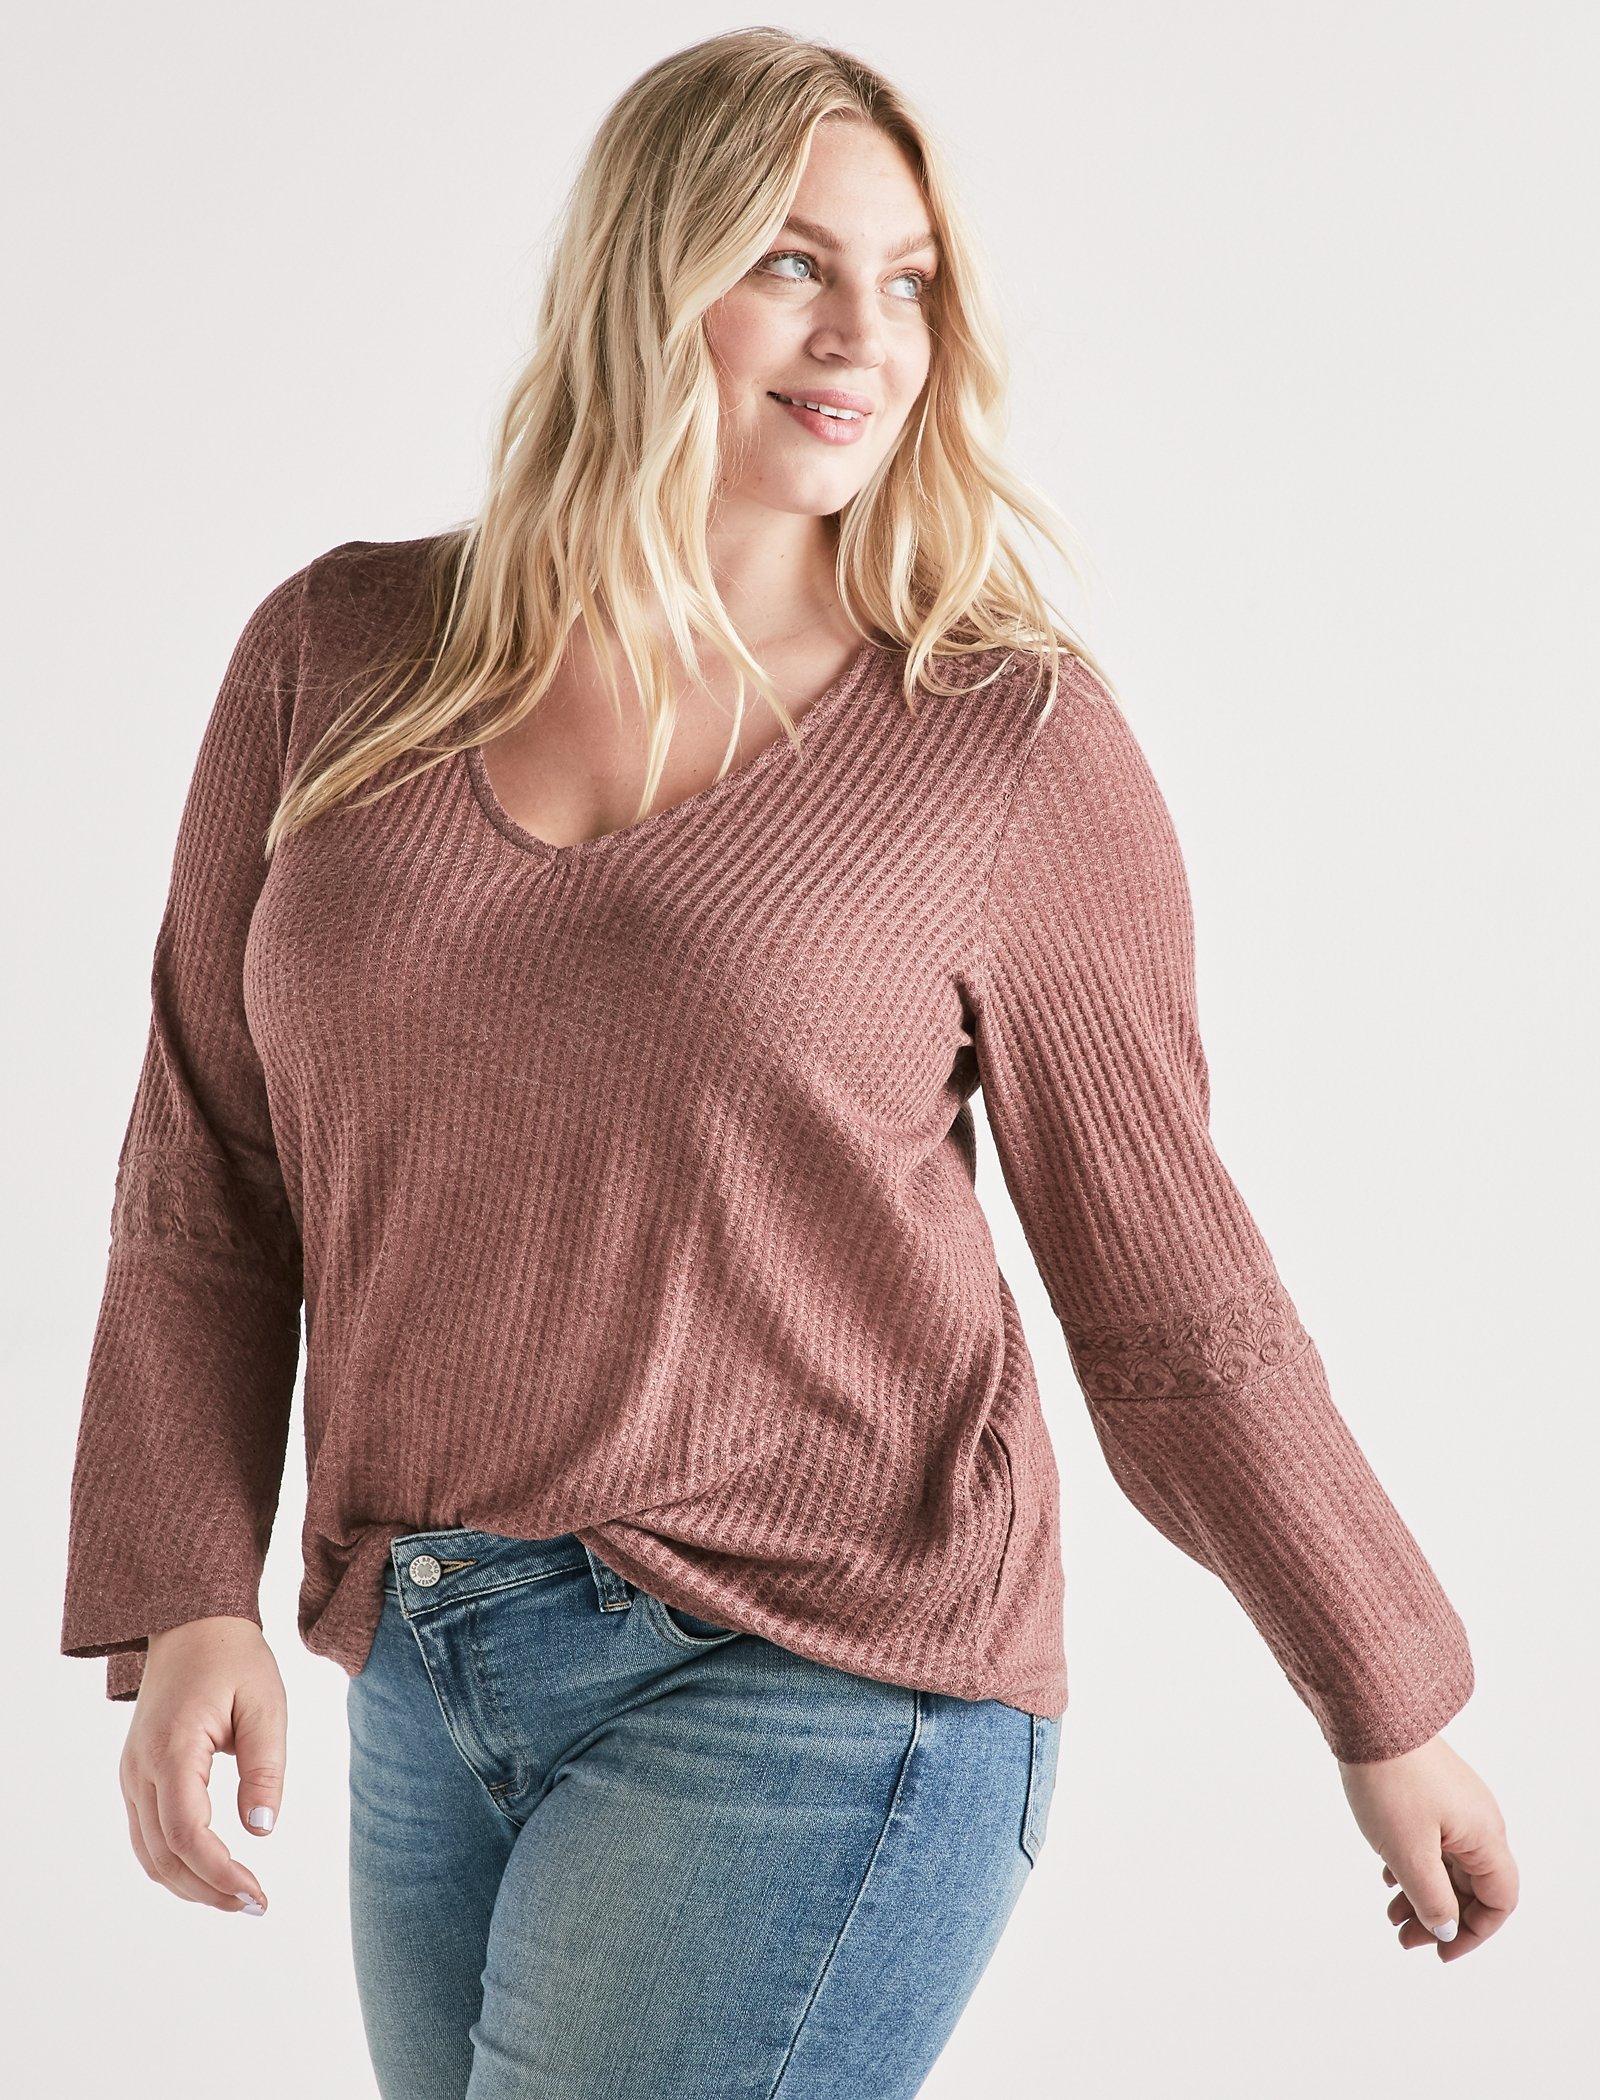 Lucky Brand Women's Plus Size Waffle Thermal Top